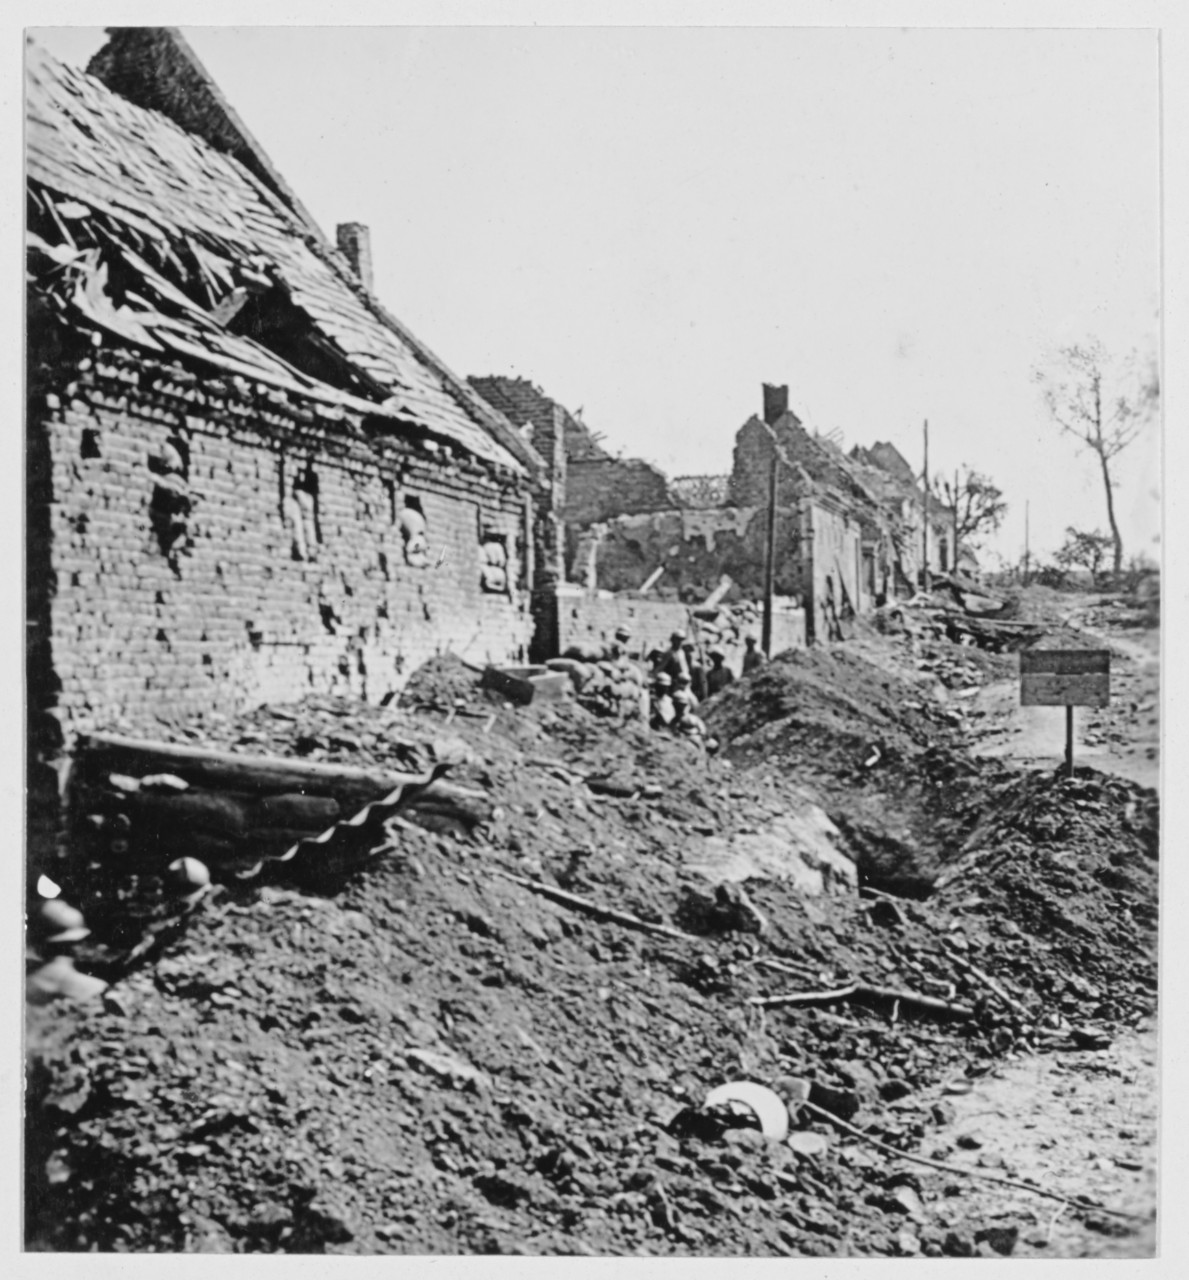 The Marne. Building with sandbags, men with helmets. France